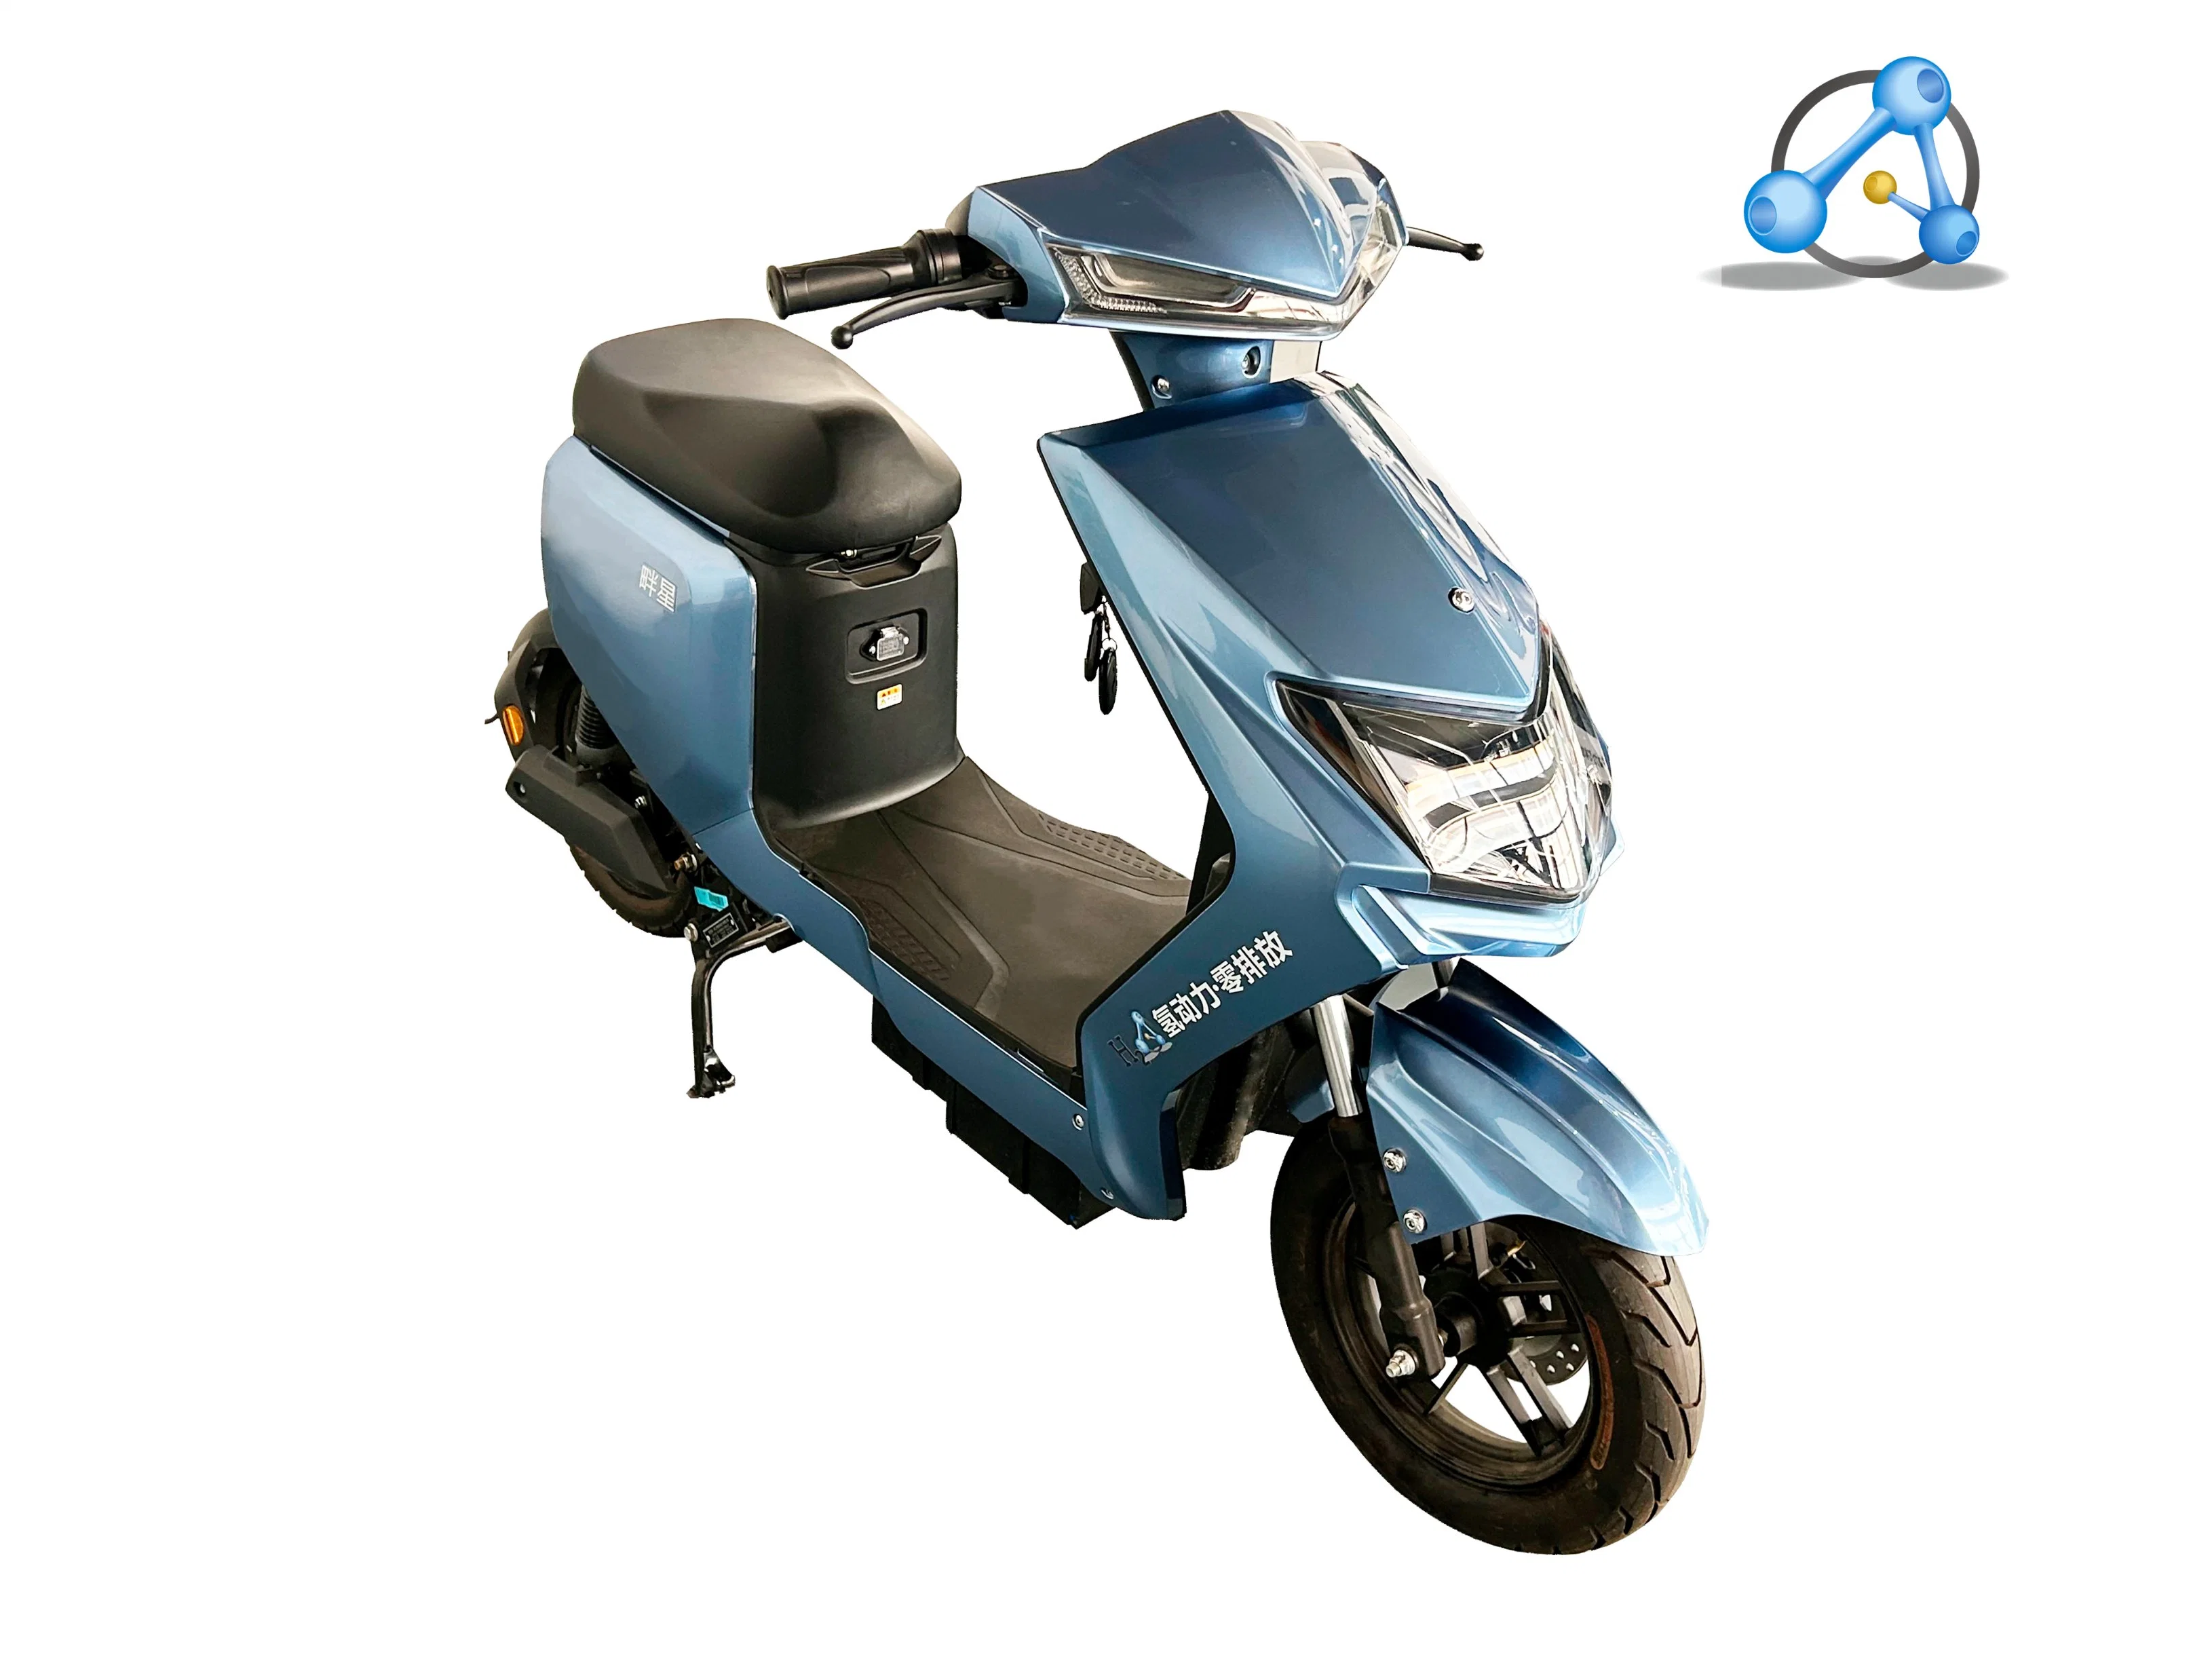 H2e Hot Selling H2 Power Fuel Cell Engine Scooter